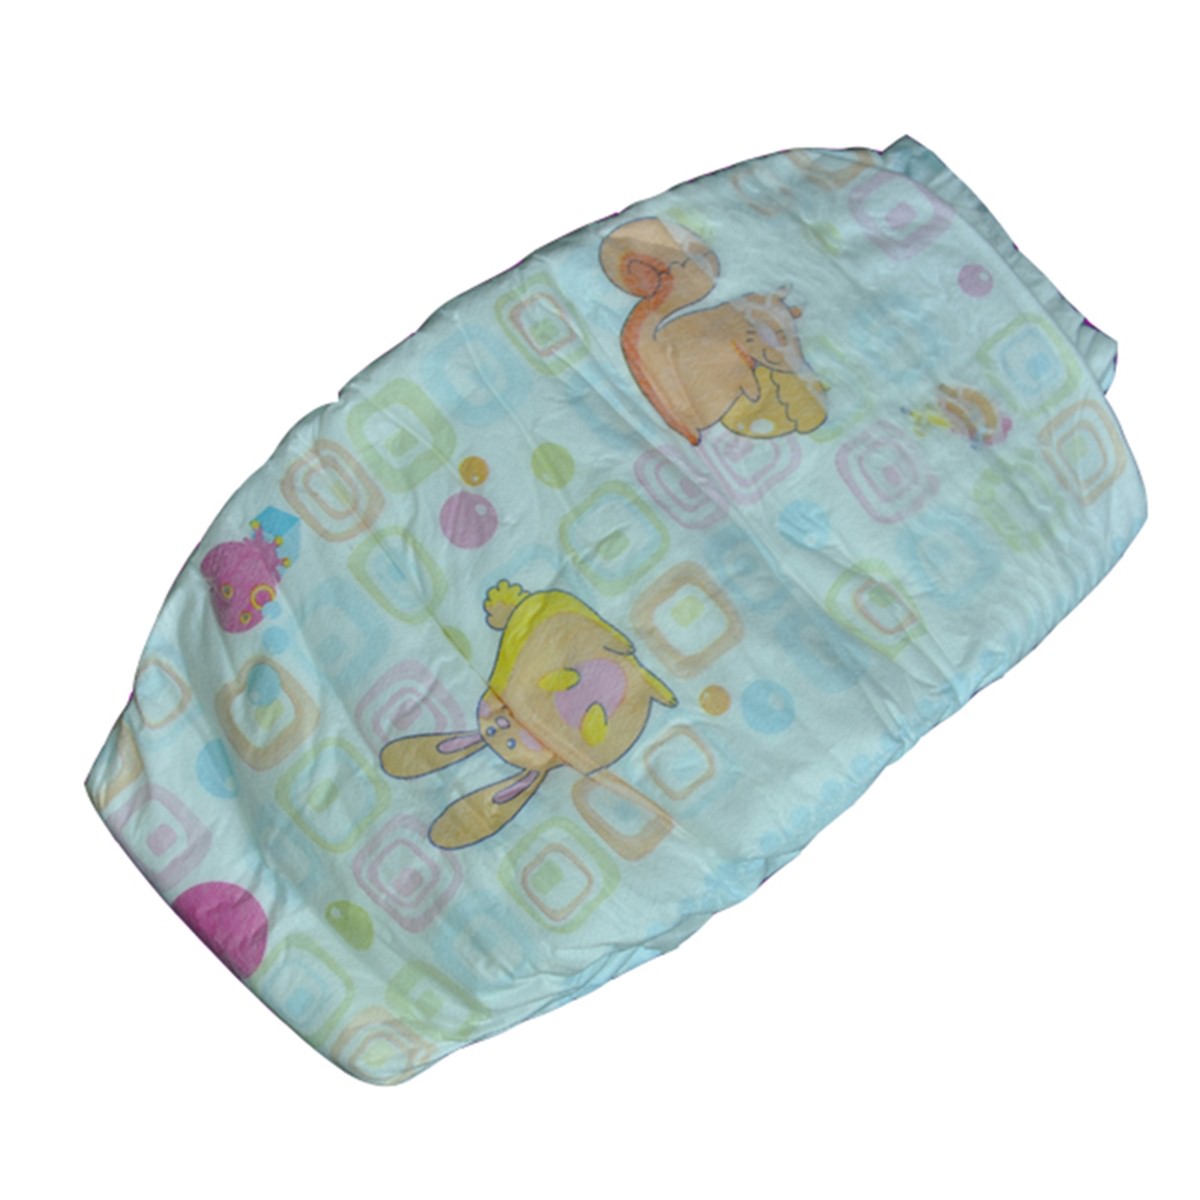 eco friendly disposable nappies